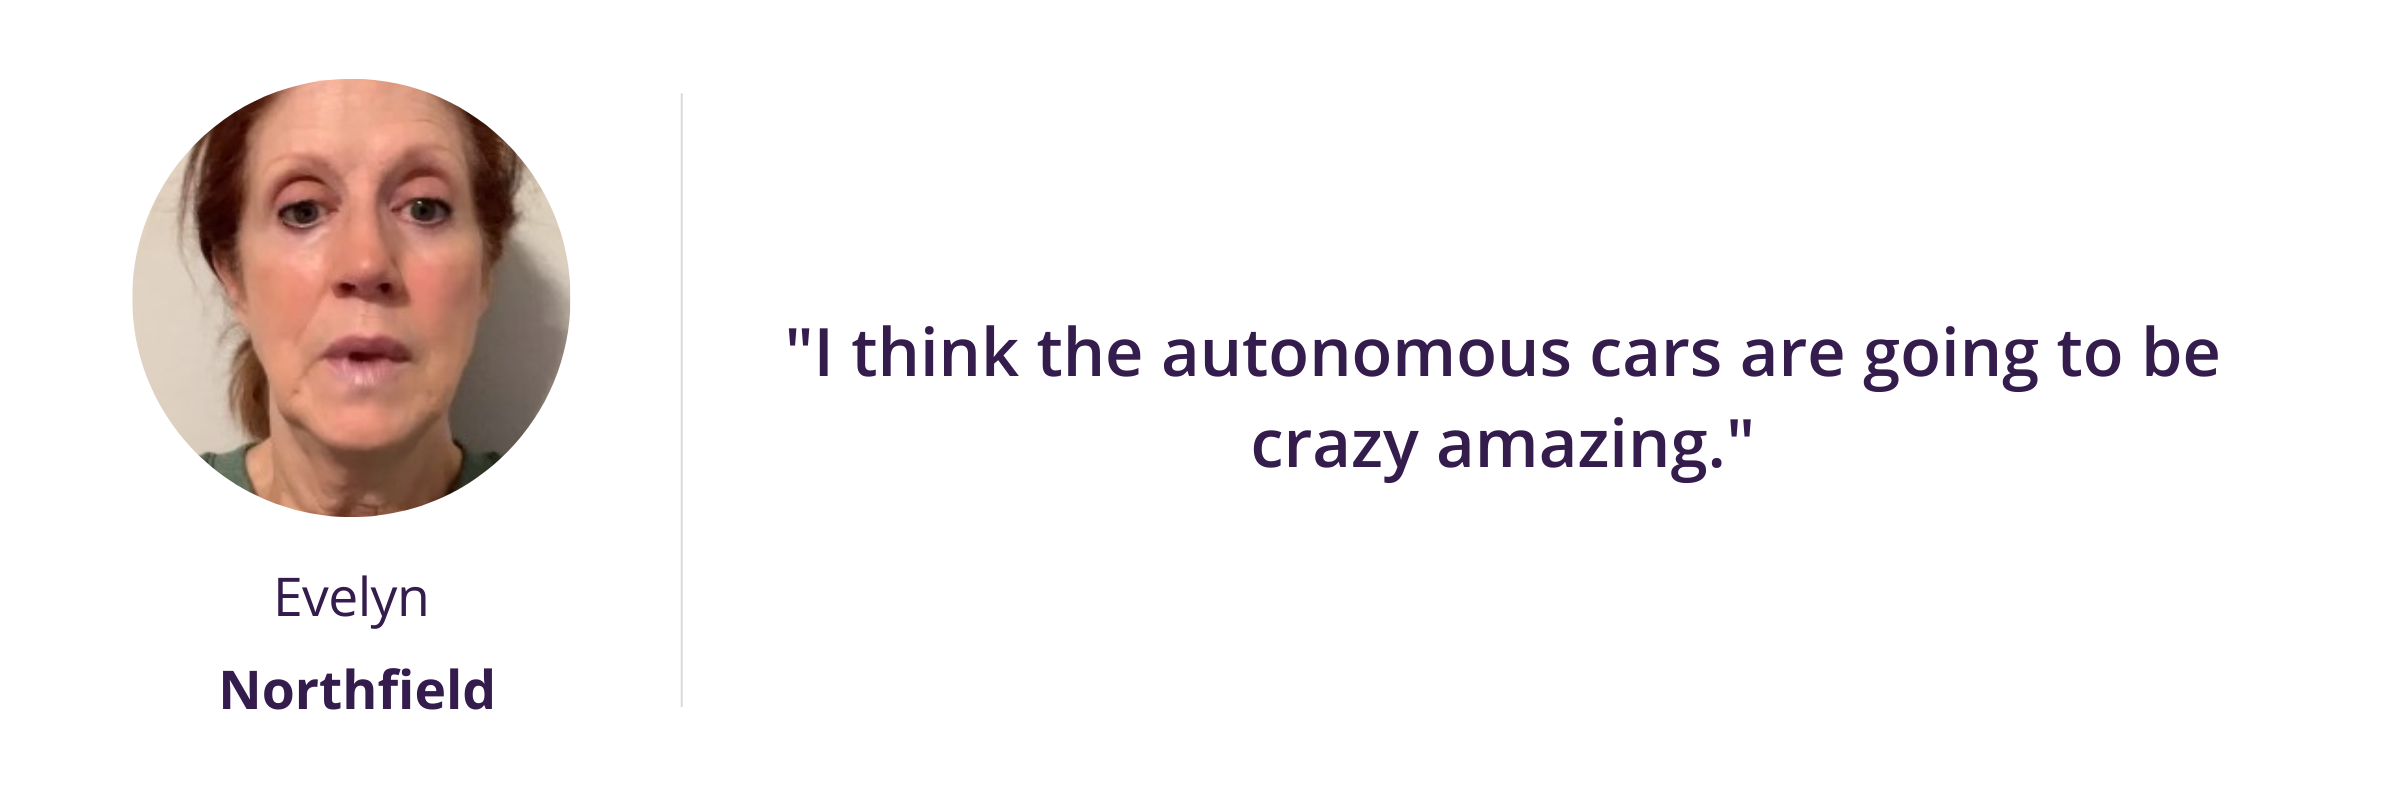 I think the autonomous cars are going to be crazy amazing.